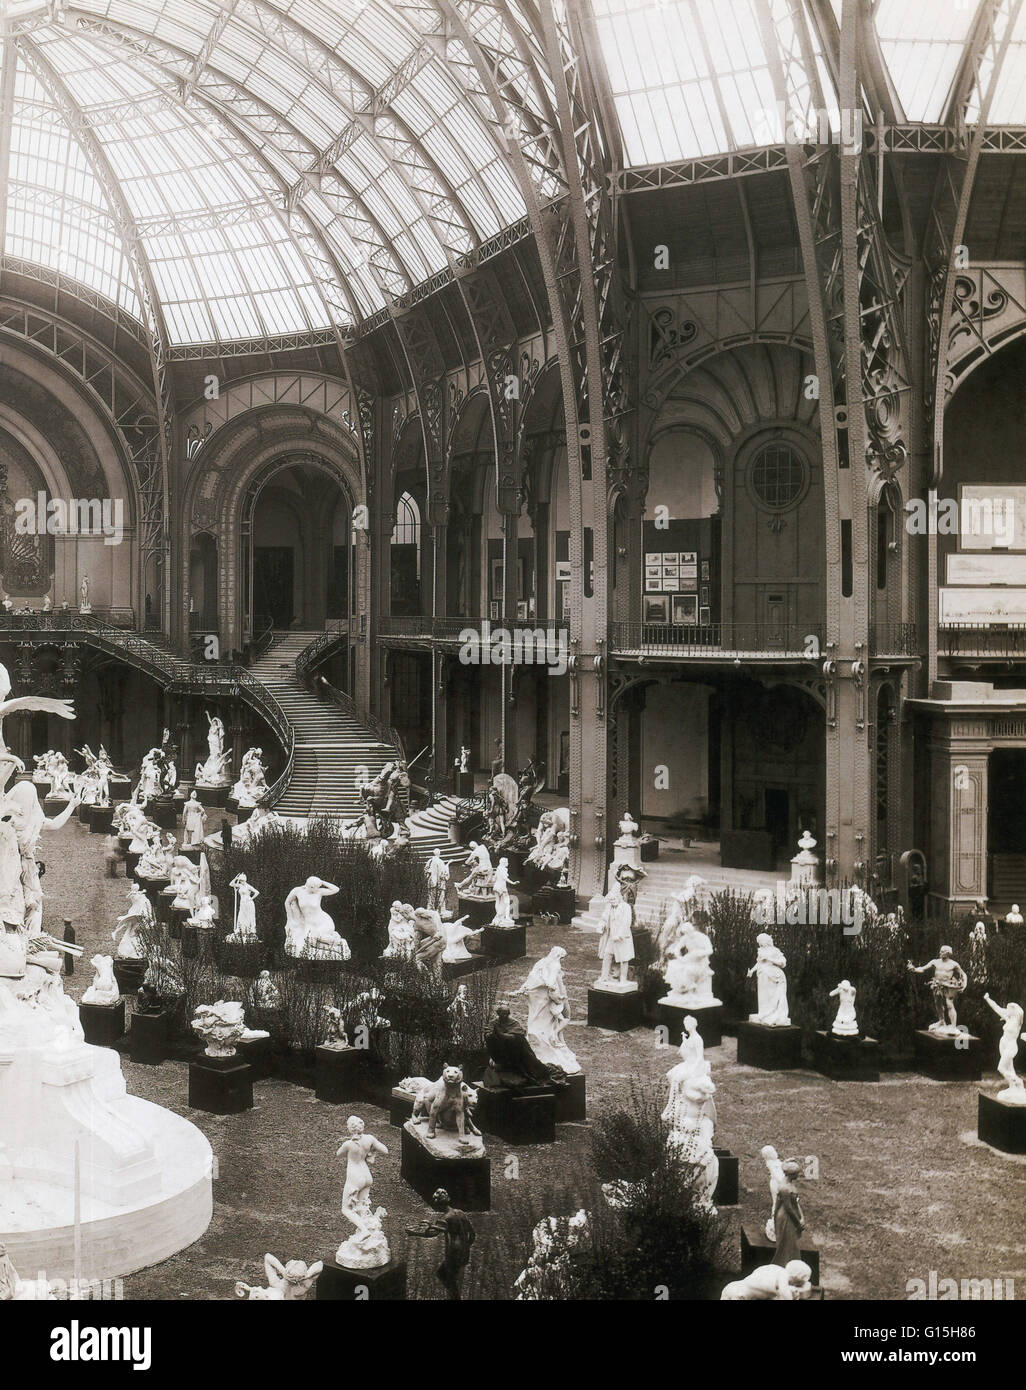 Exhibition of sculpture at the Grand Palais. Construction of the Grand Palais began in 1897 as part of the preparation works for the Universal Exposition of 1900. The main space, almost 780 feet long, was constructed with an iron, steel and glass barrel-v Stock Photo